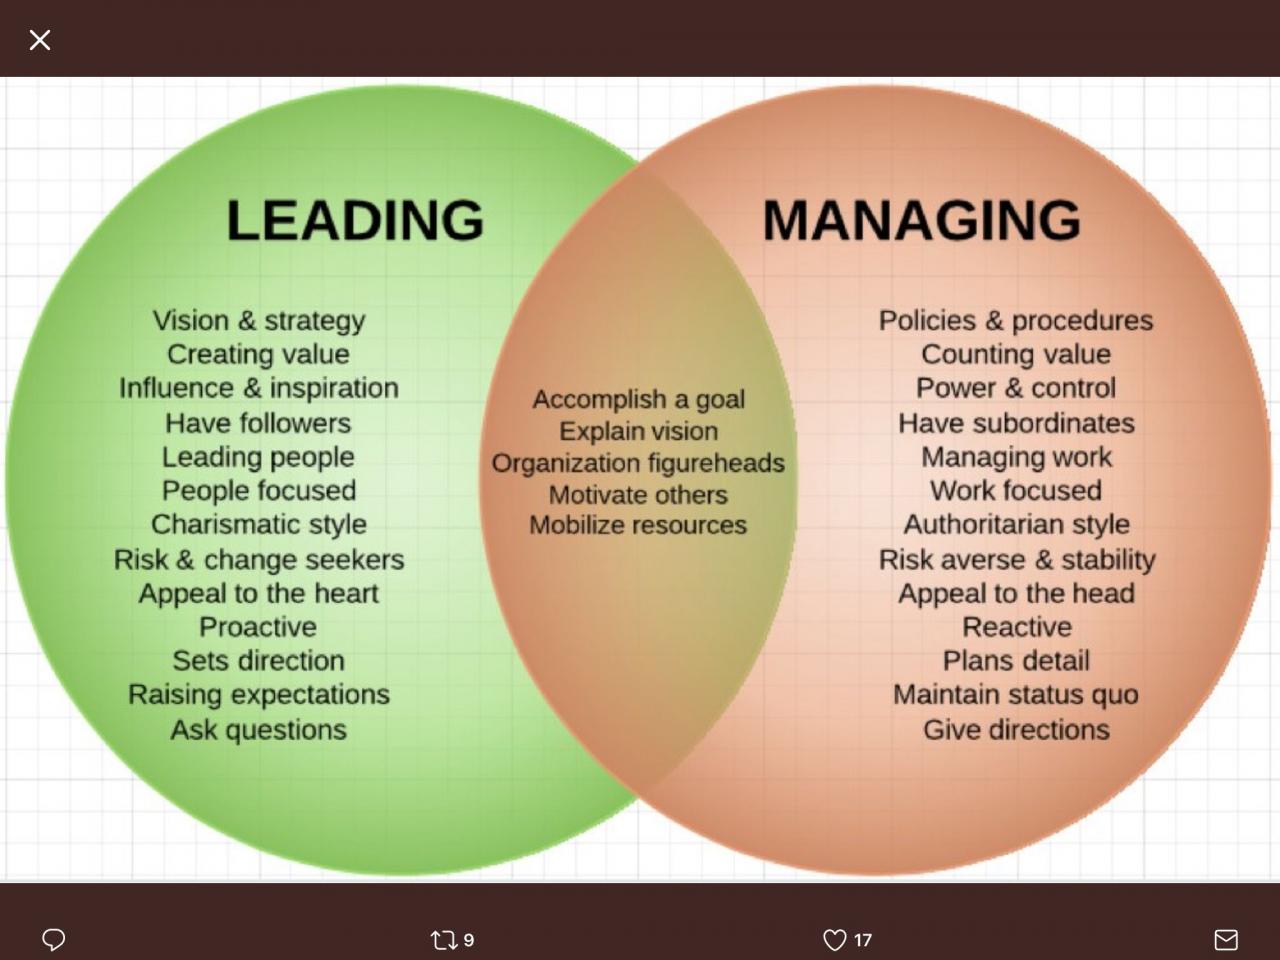 Difference between management and leadership in an organization